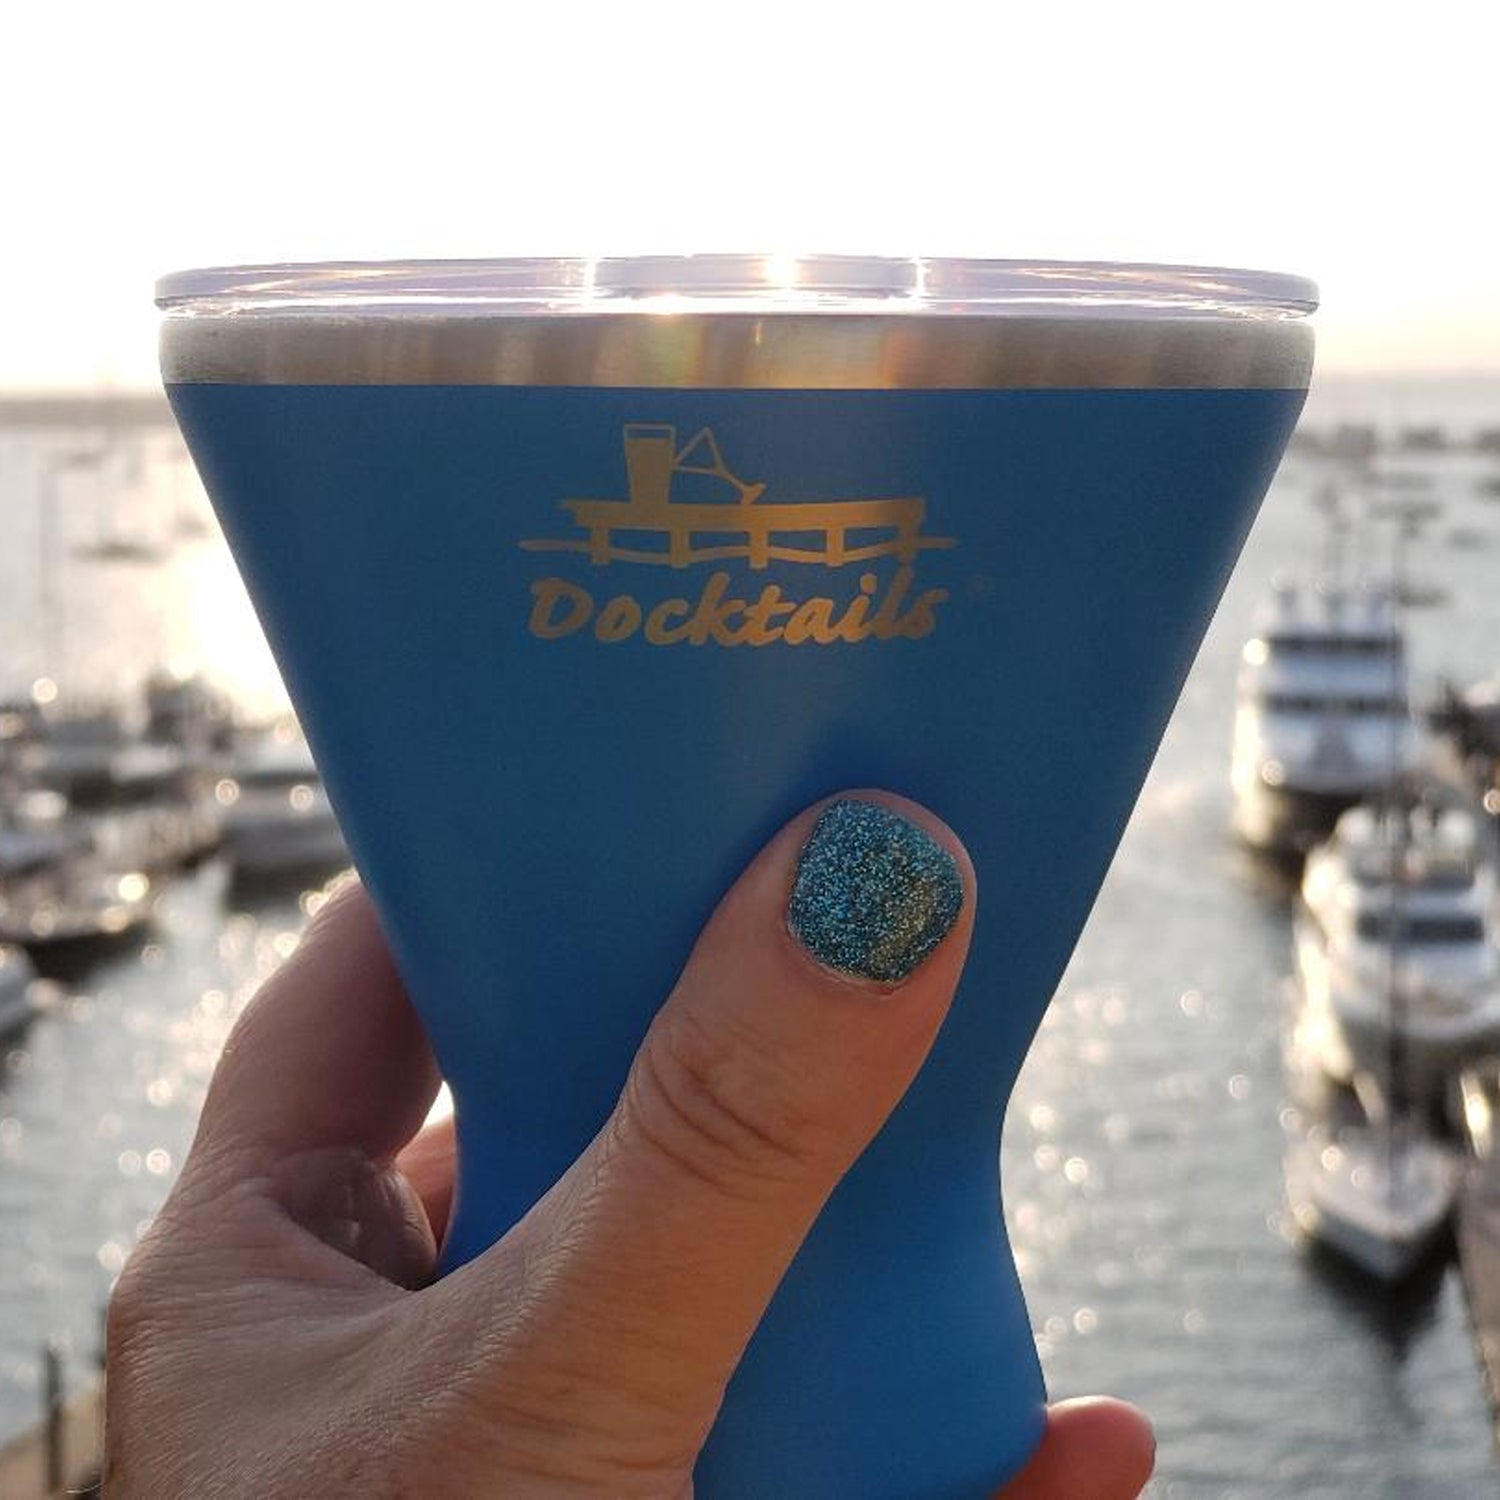 Docktails insulated stemless martini cup in use at a waterfront deck